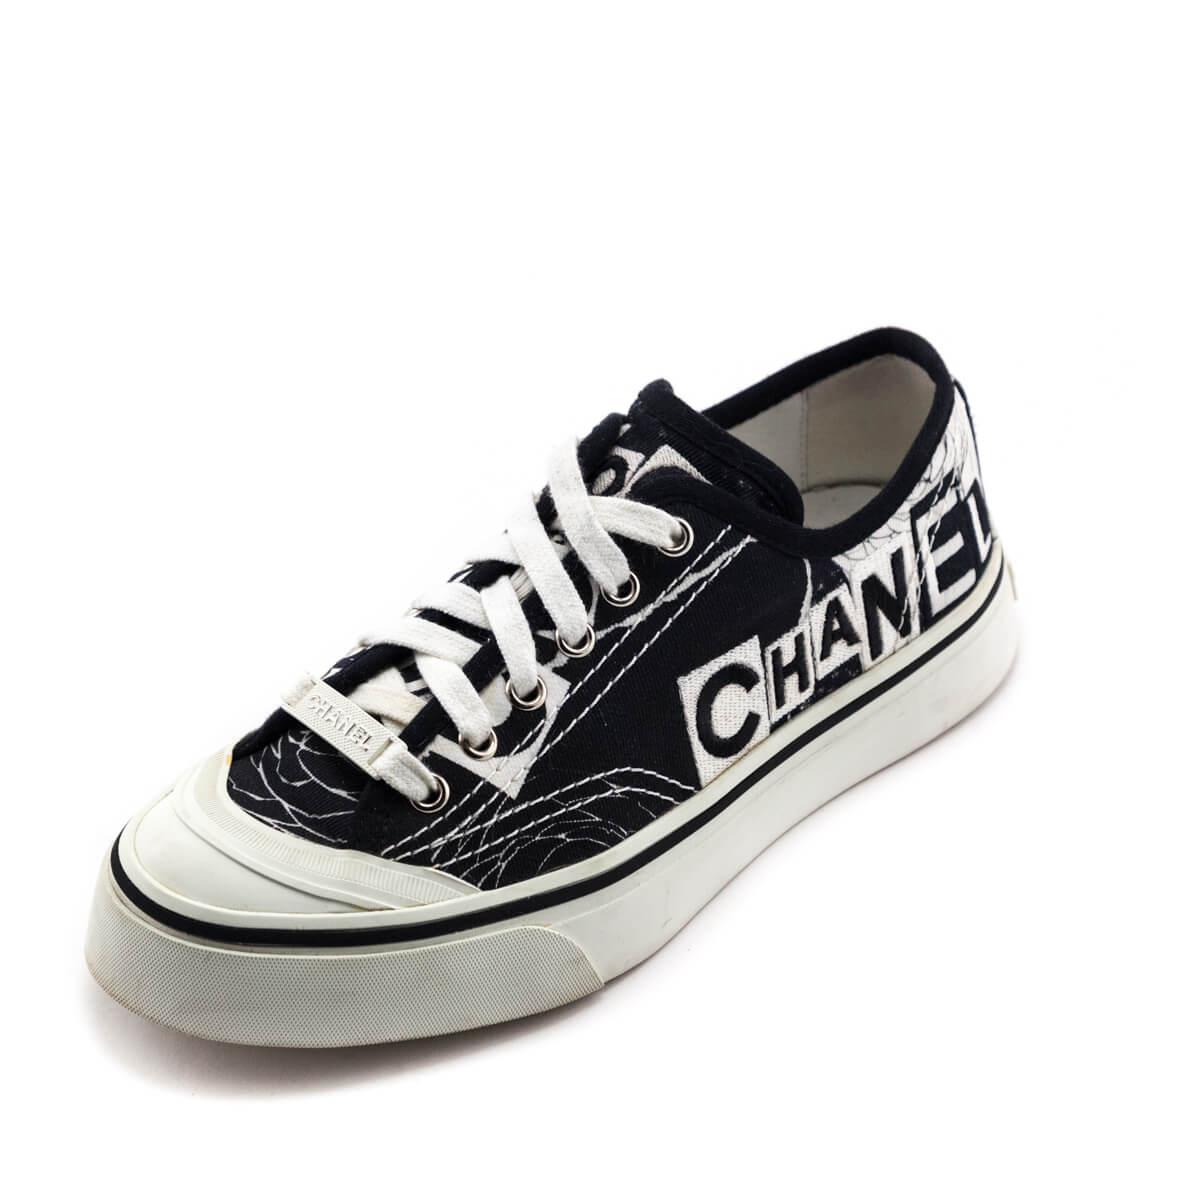 Chanel Black & White Canvas Printed Low Top Sneakers Size US 6.5 | EU 36.5 - Love that Bag etc - Preowned Authentic Designer Handbags & Preloved Fashions